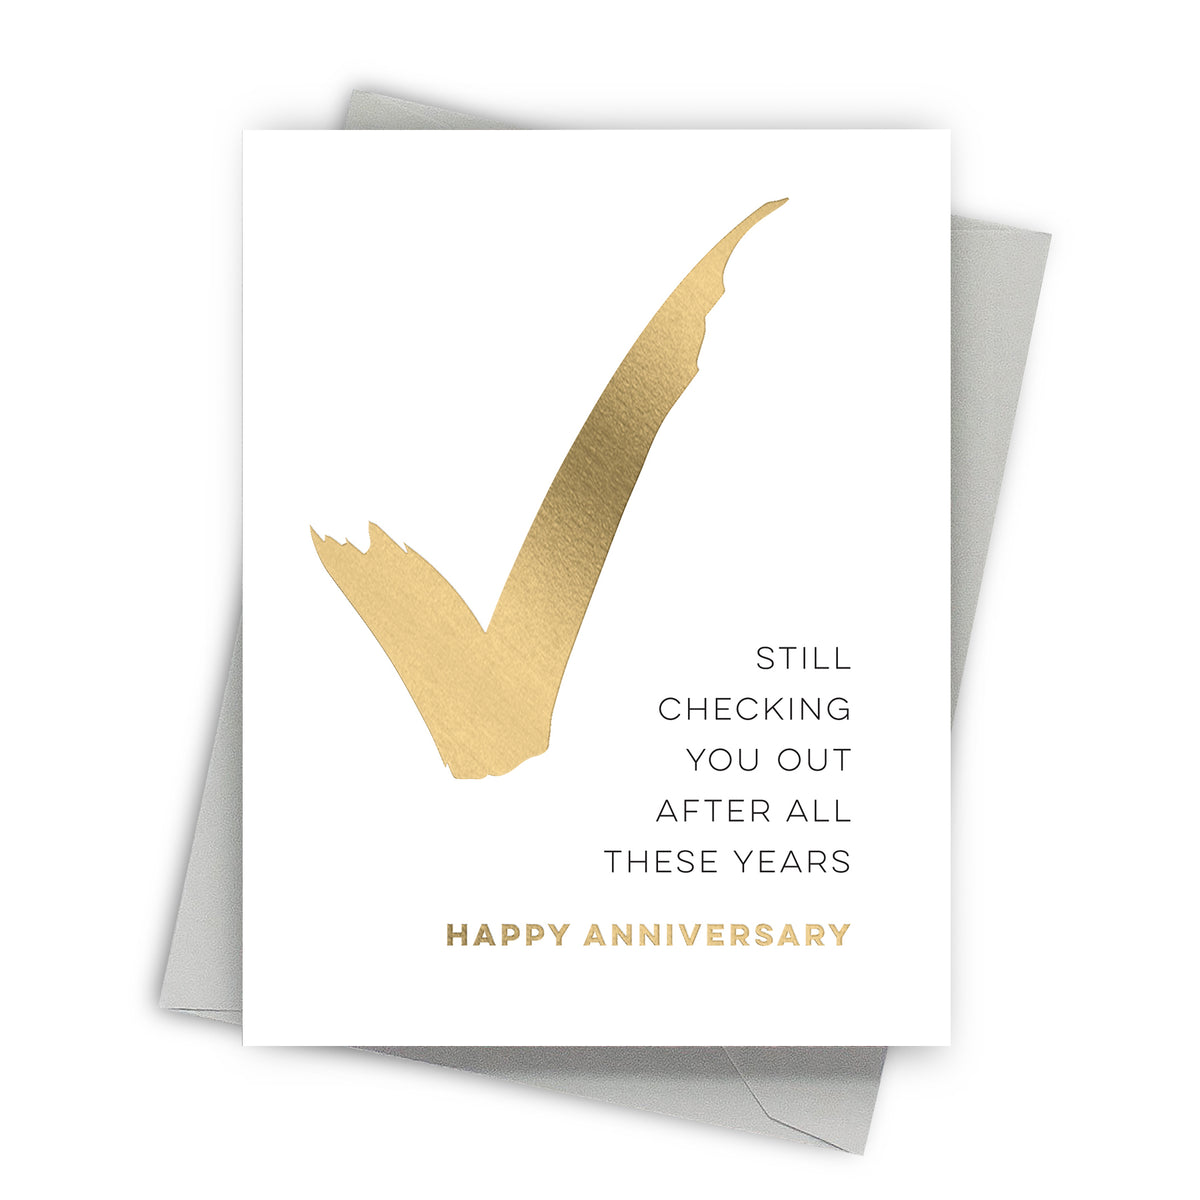 Checking You Out Anniversary Card by Fine Moments